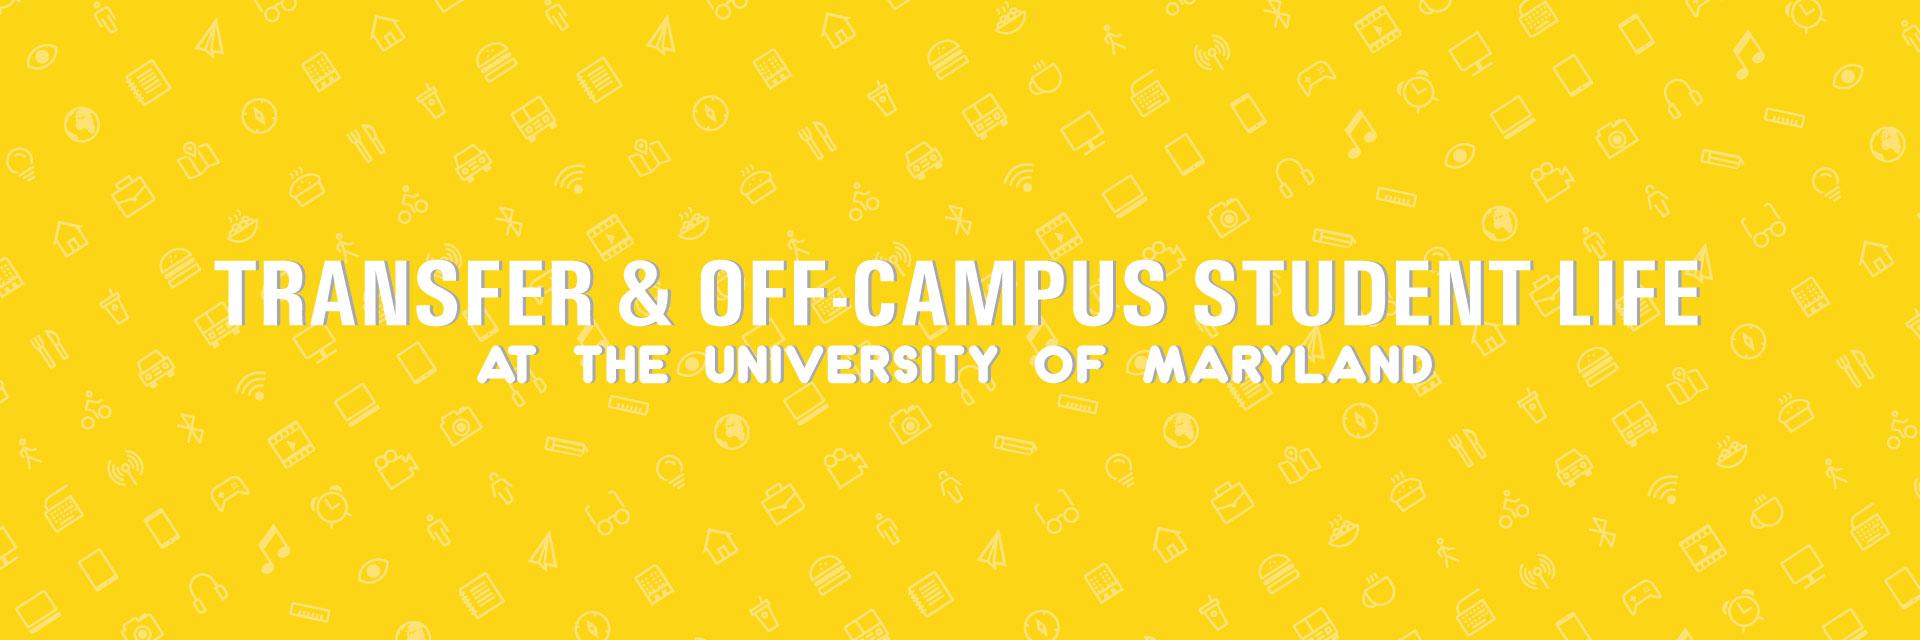 Transfer & Off-Campus Student Life at the University of Maryland